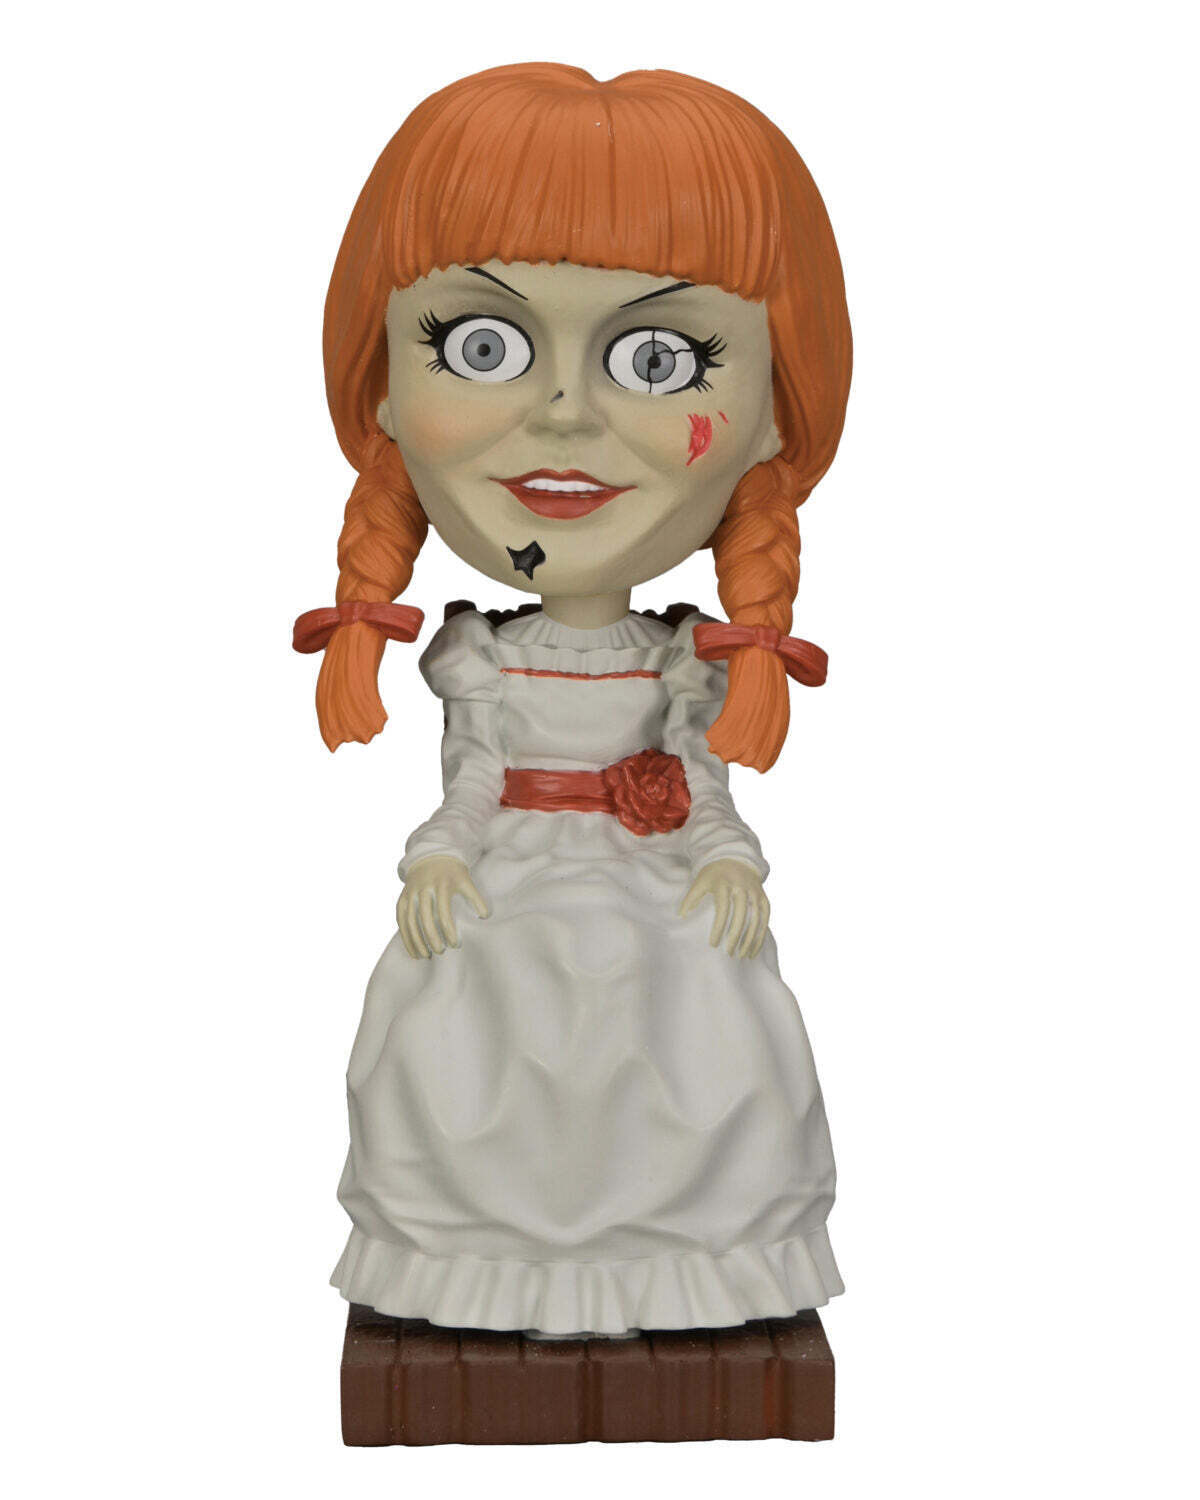 Annabelle The Conjuring Universe Bobblehead